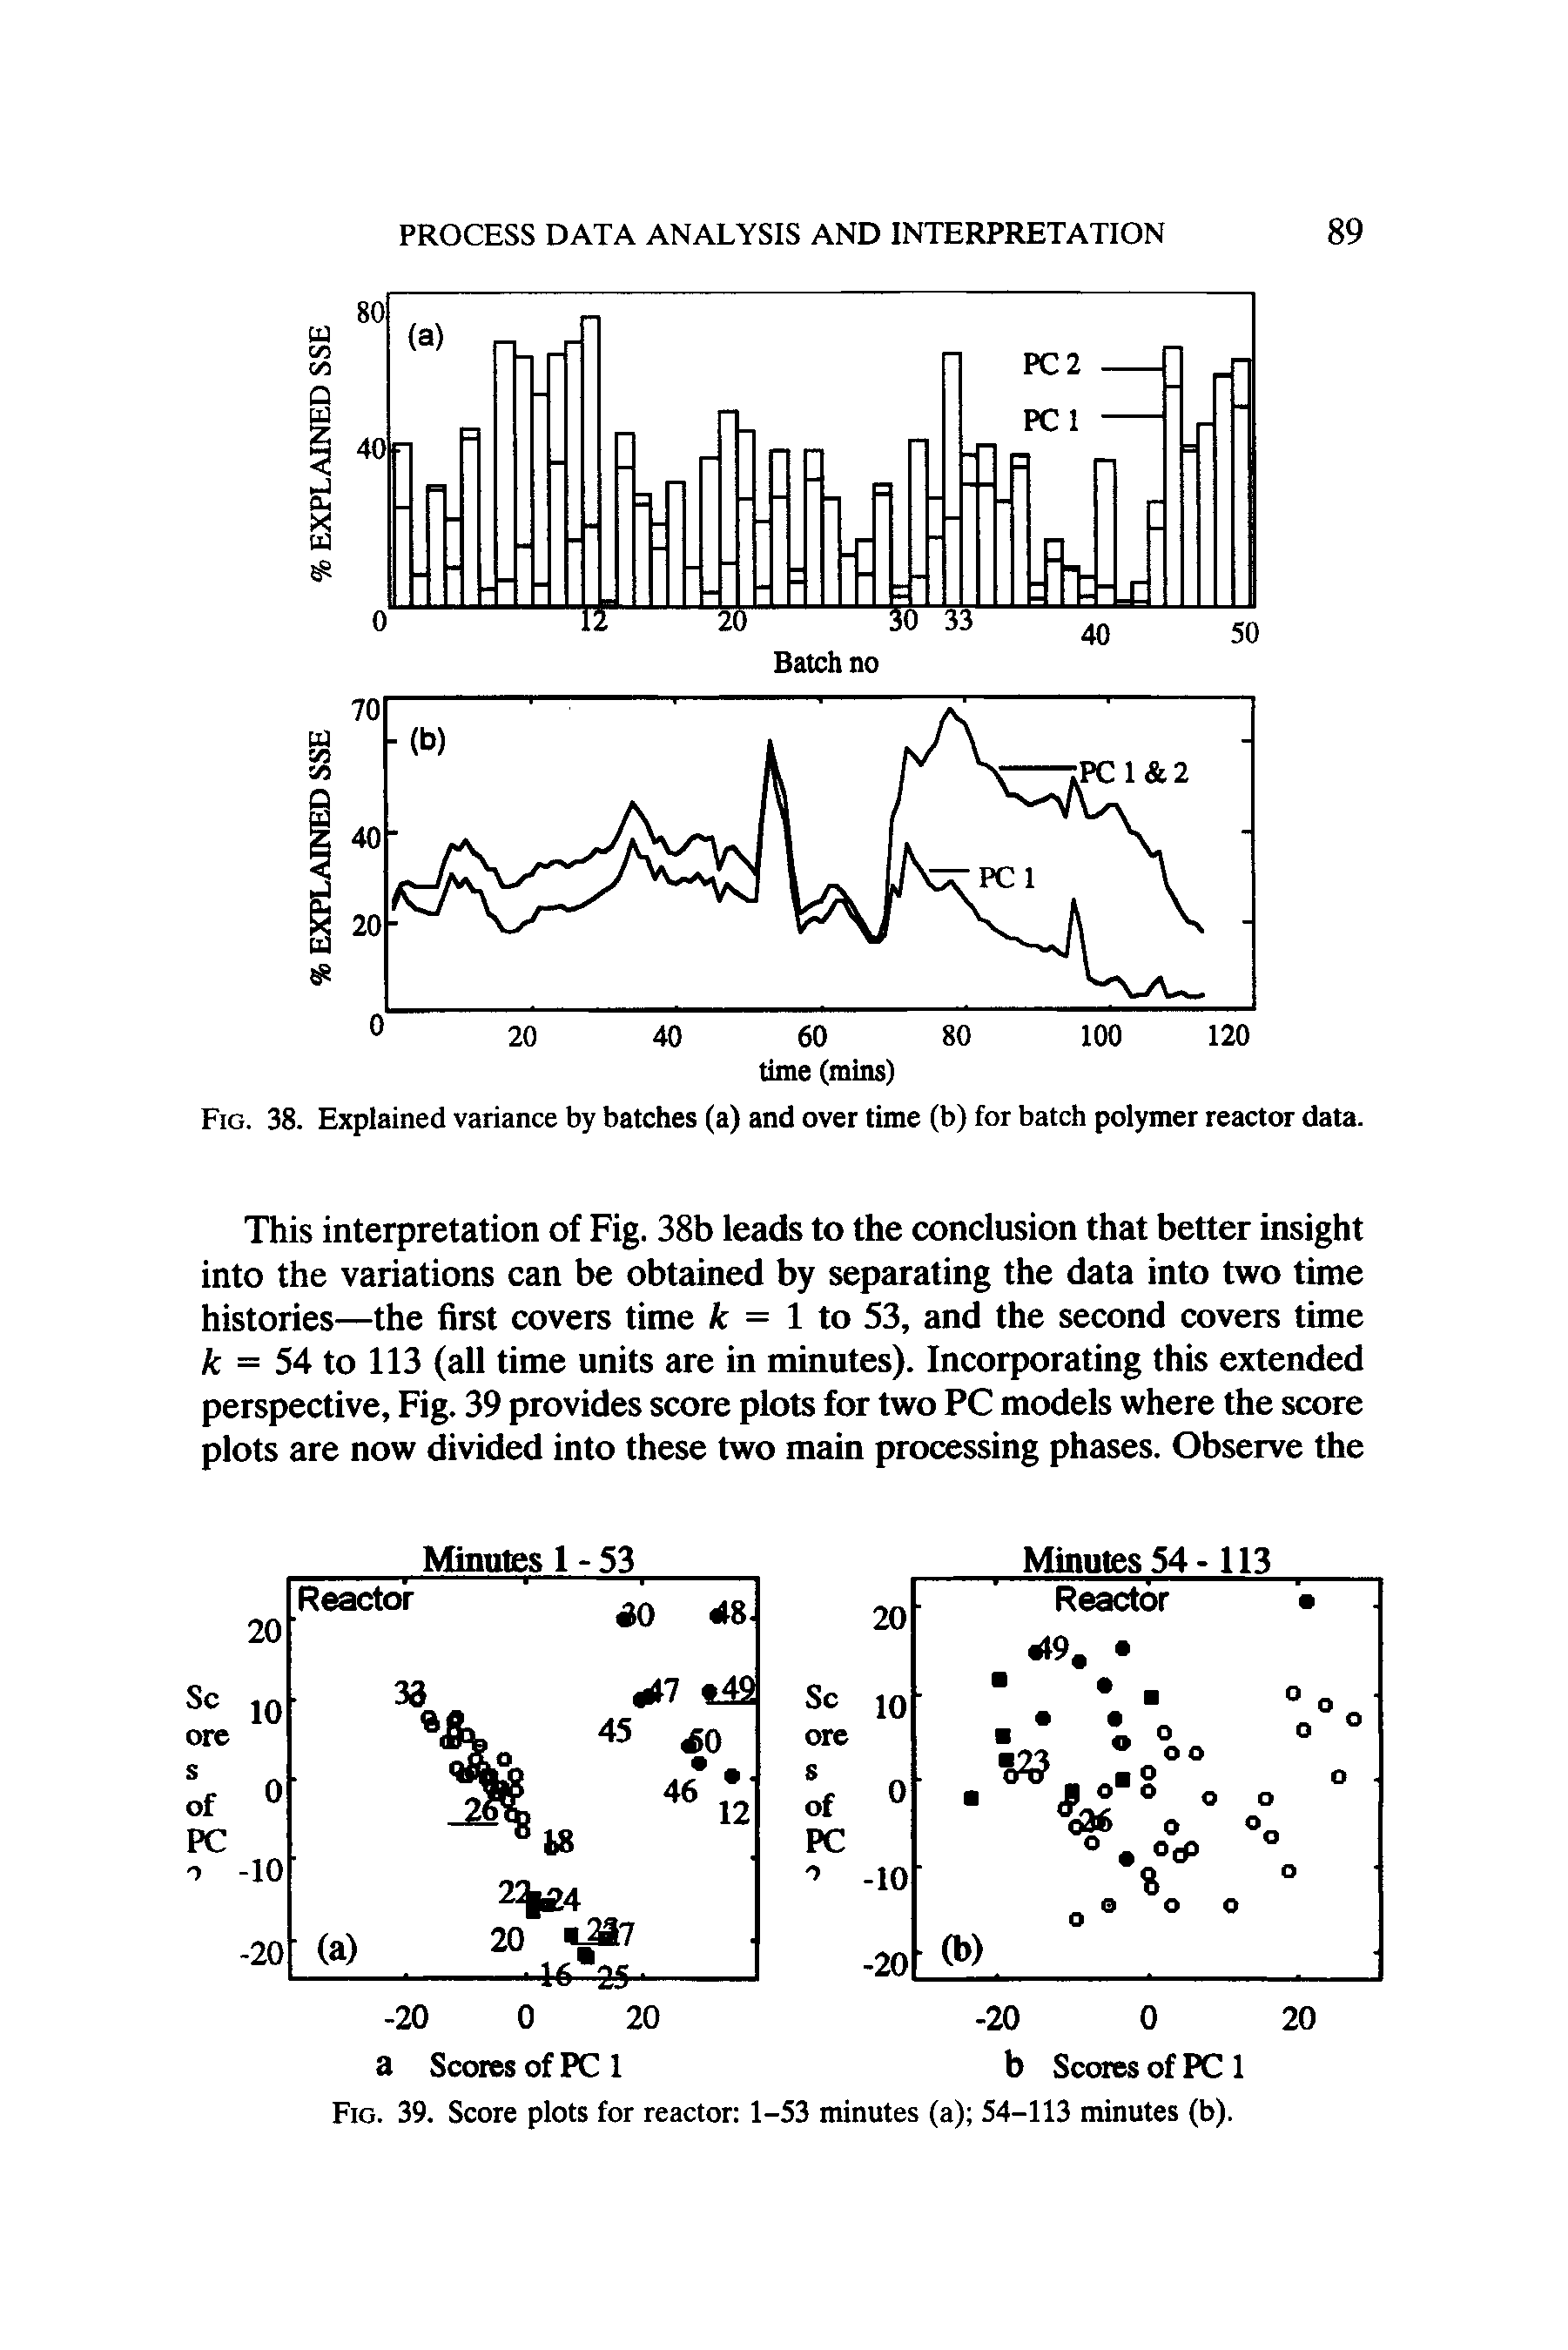 Fig. 38. Explained variance by batches (a) and over time (b) for batch polymer reactor data.